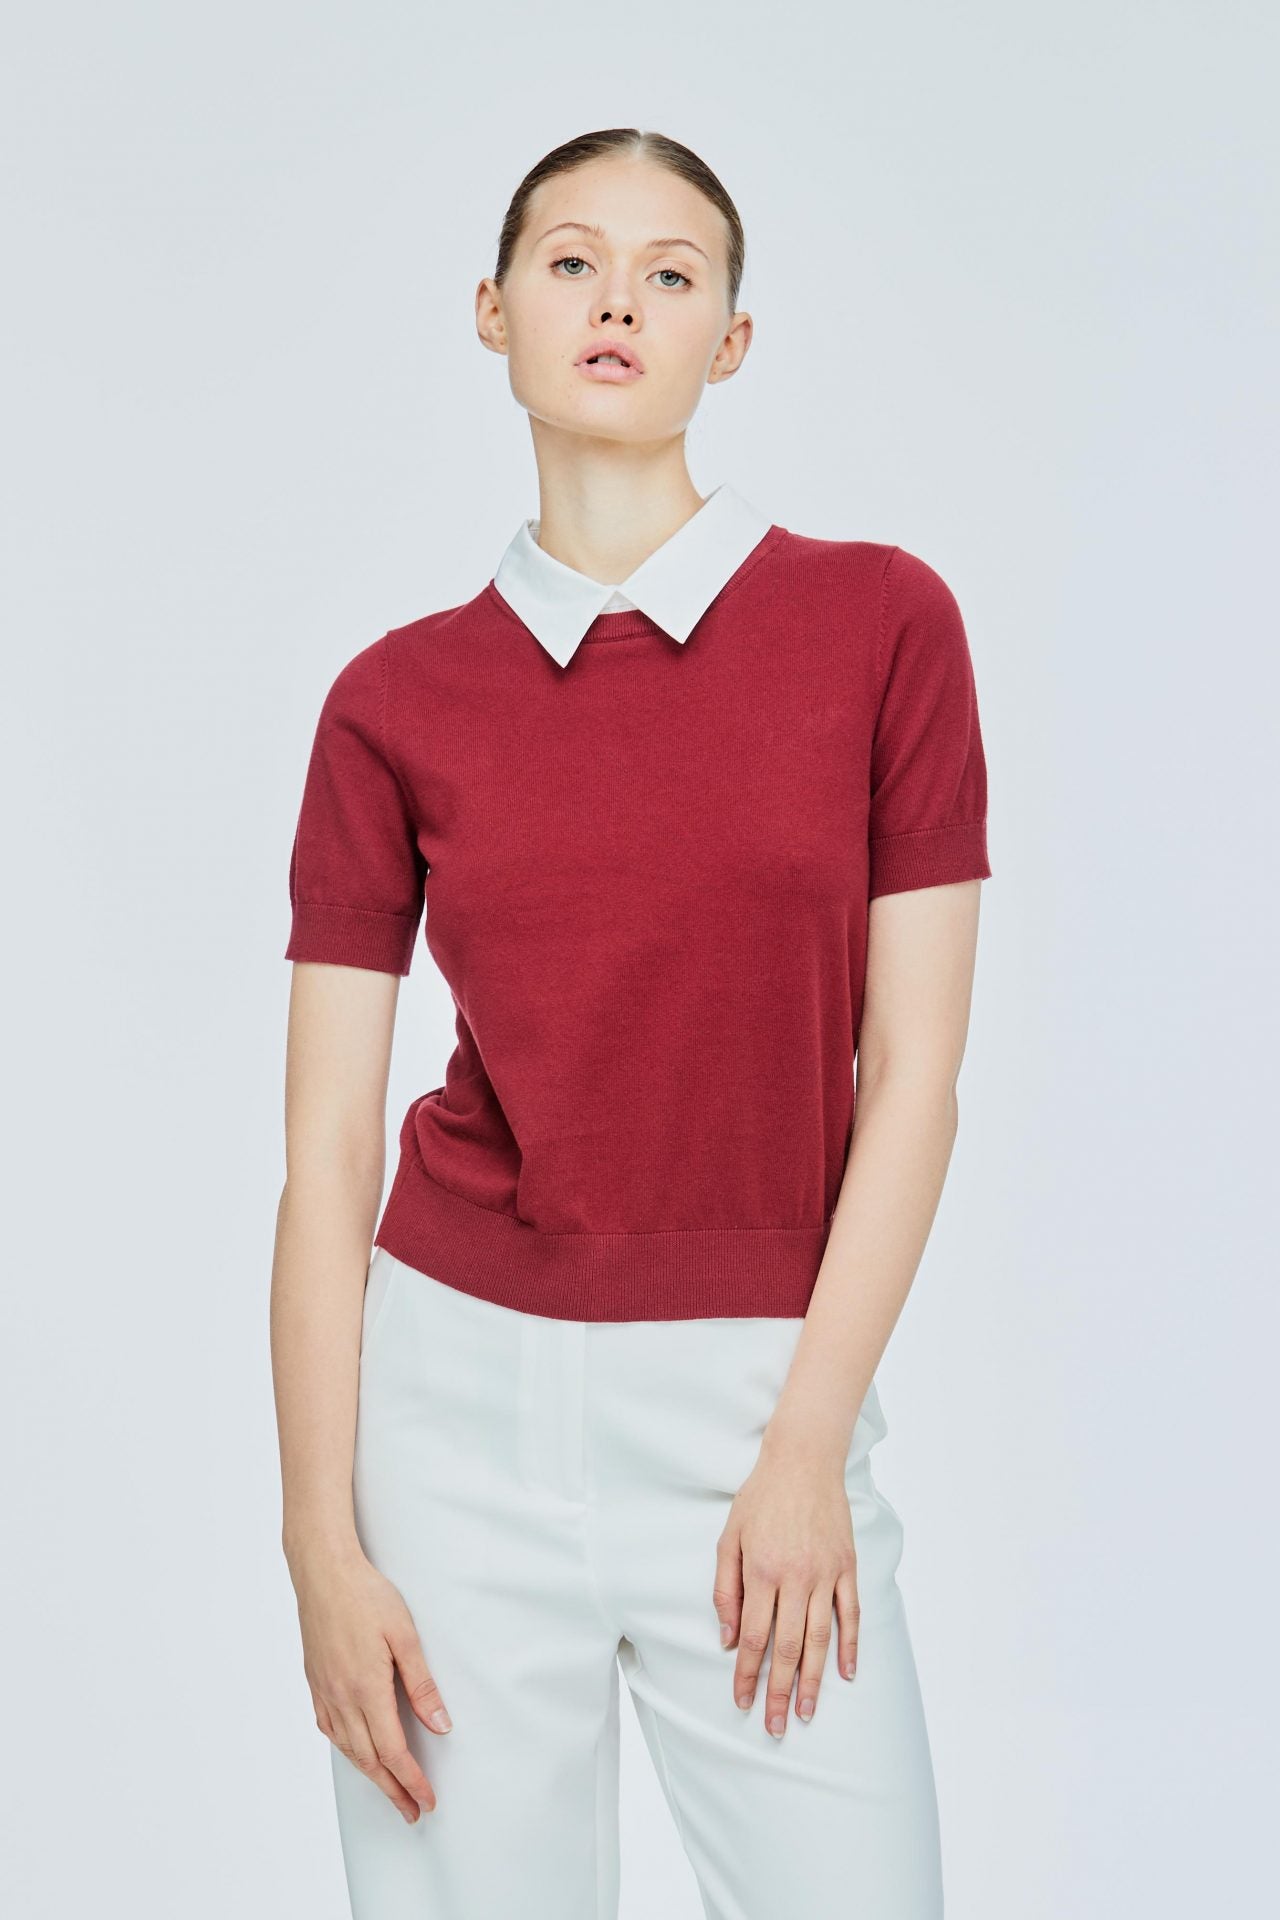 AK 11093 COLLARED KNIT TOP MAROON